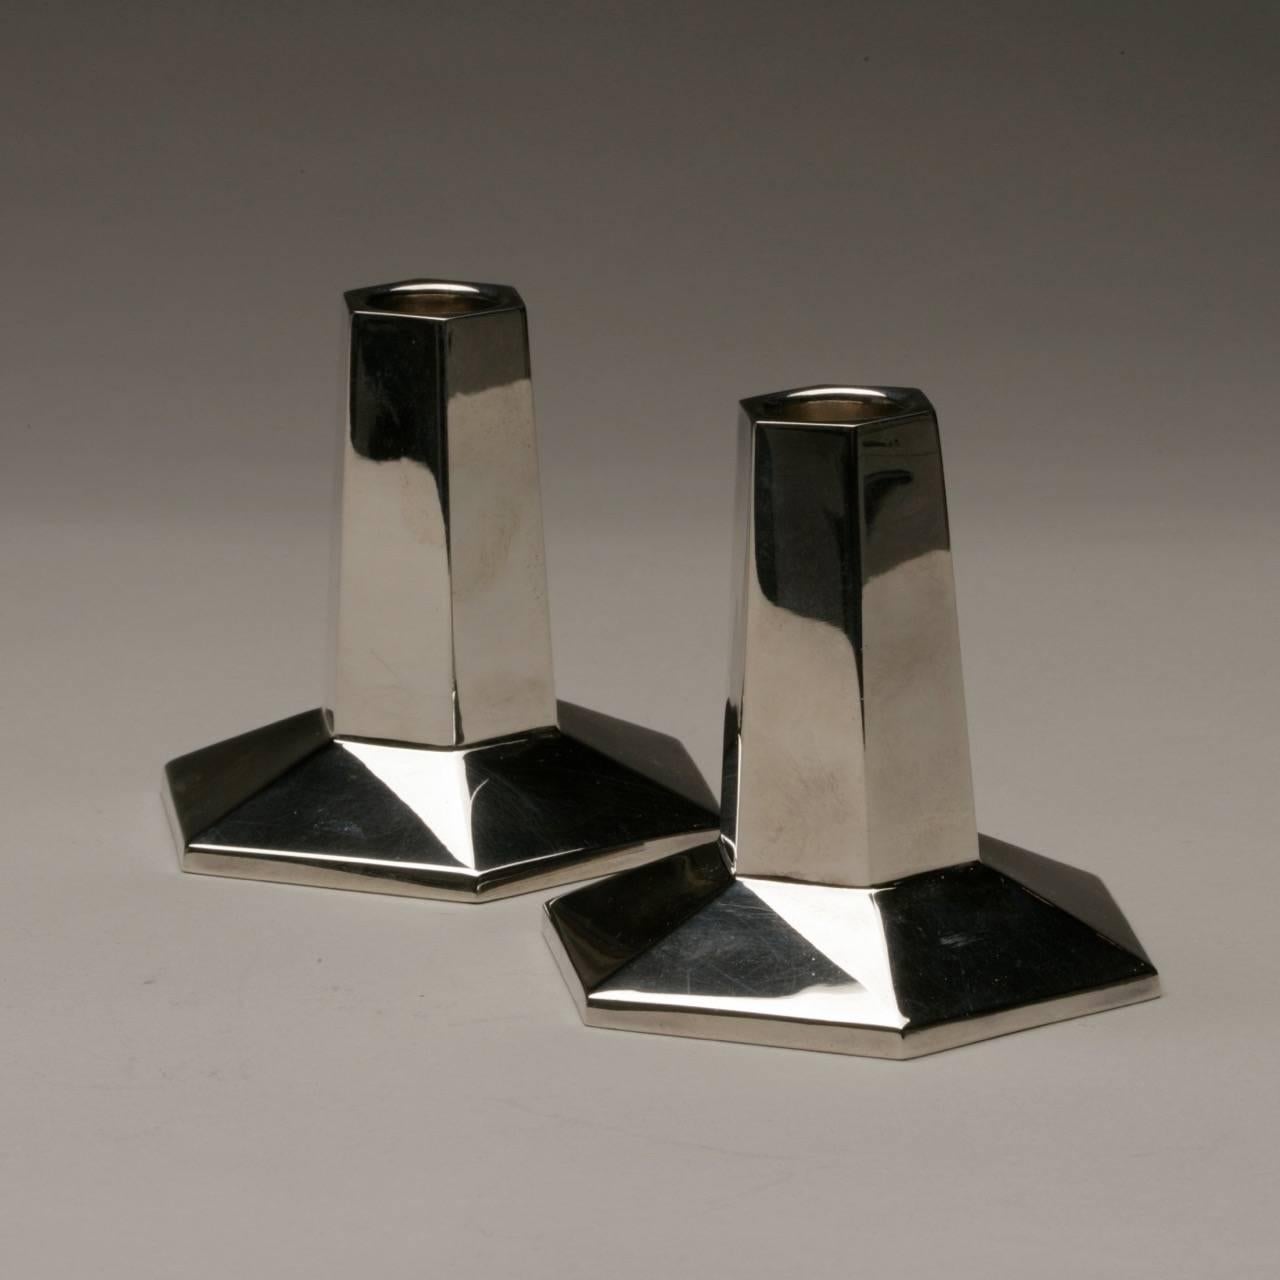 Tiffany and Company sterling silver candlesticks by Frank Lloyd Wright.

Original design by Frank Lloyd Wright, Tiffany also made these in lead crystal.

This pair was specially commissioned and made in Italy for Tiffany for a VIP customer.